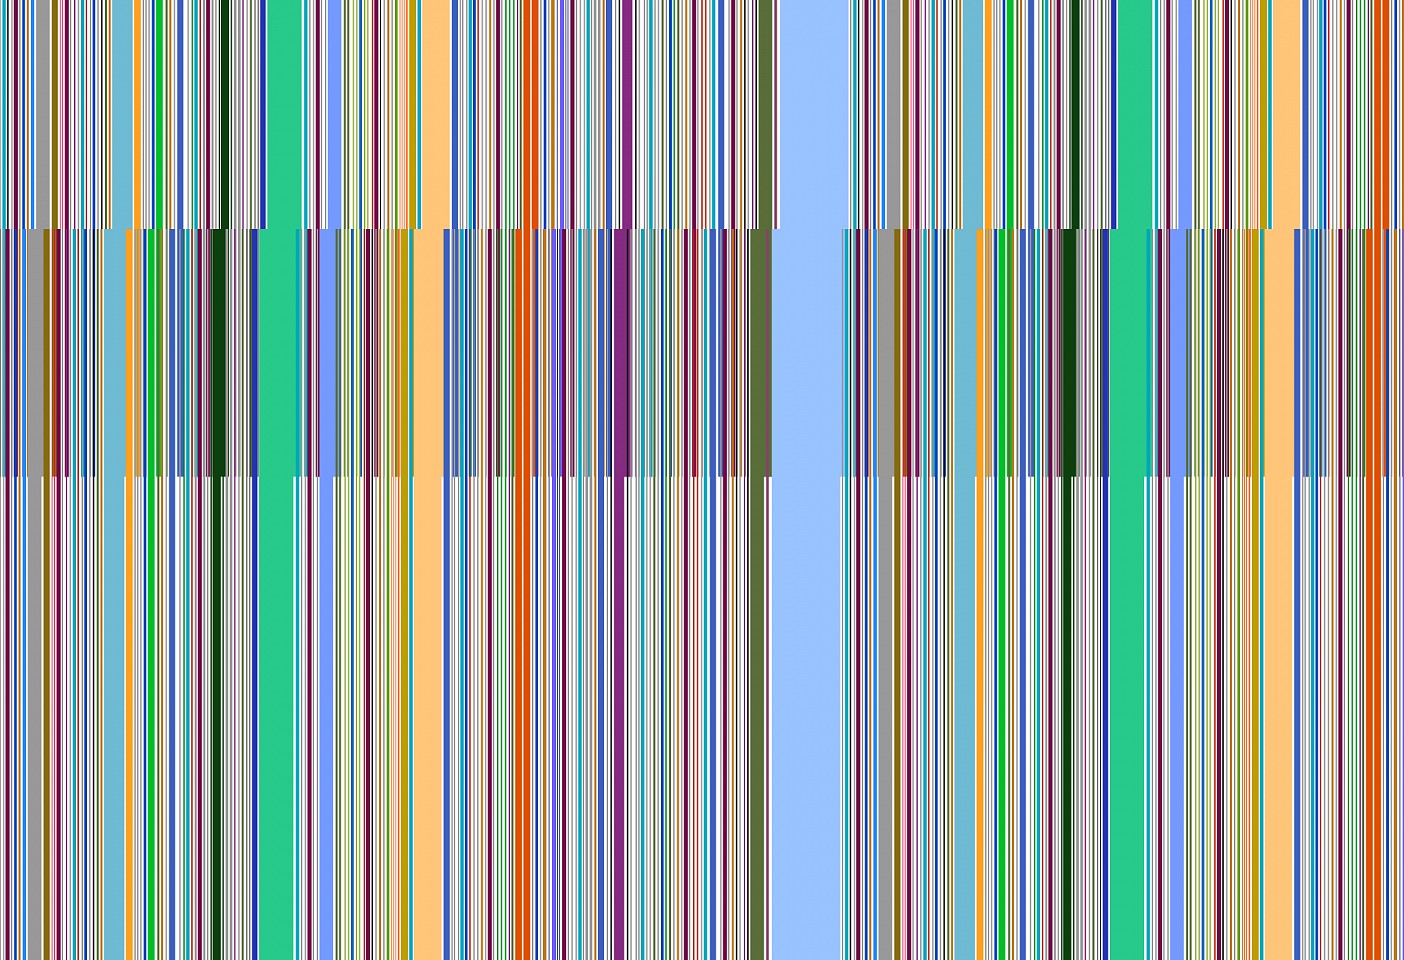 Dane Albert, Color Sticks #35, 2023
Acrylic on canvas (Concept), 48 x 72 in. (121.9 x 182.9 cm)
Series of colored lines and shapes in multiple configurations
DA.2023.sticks-035